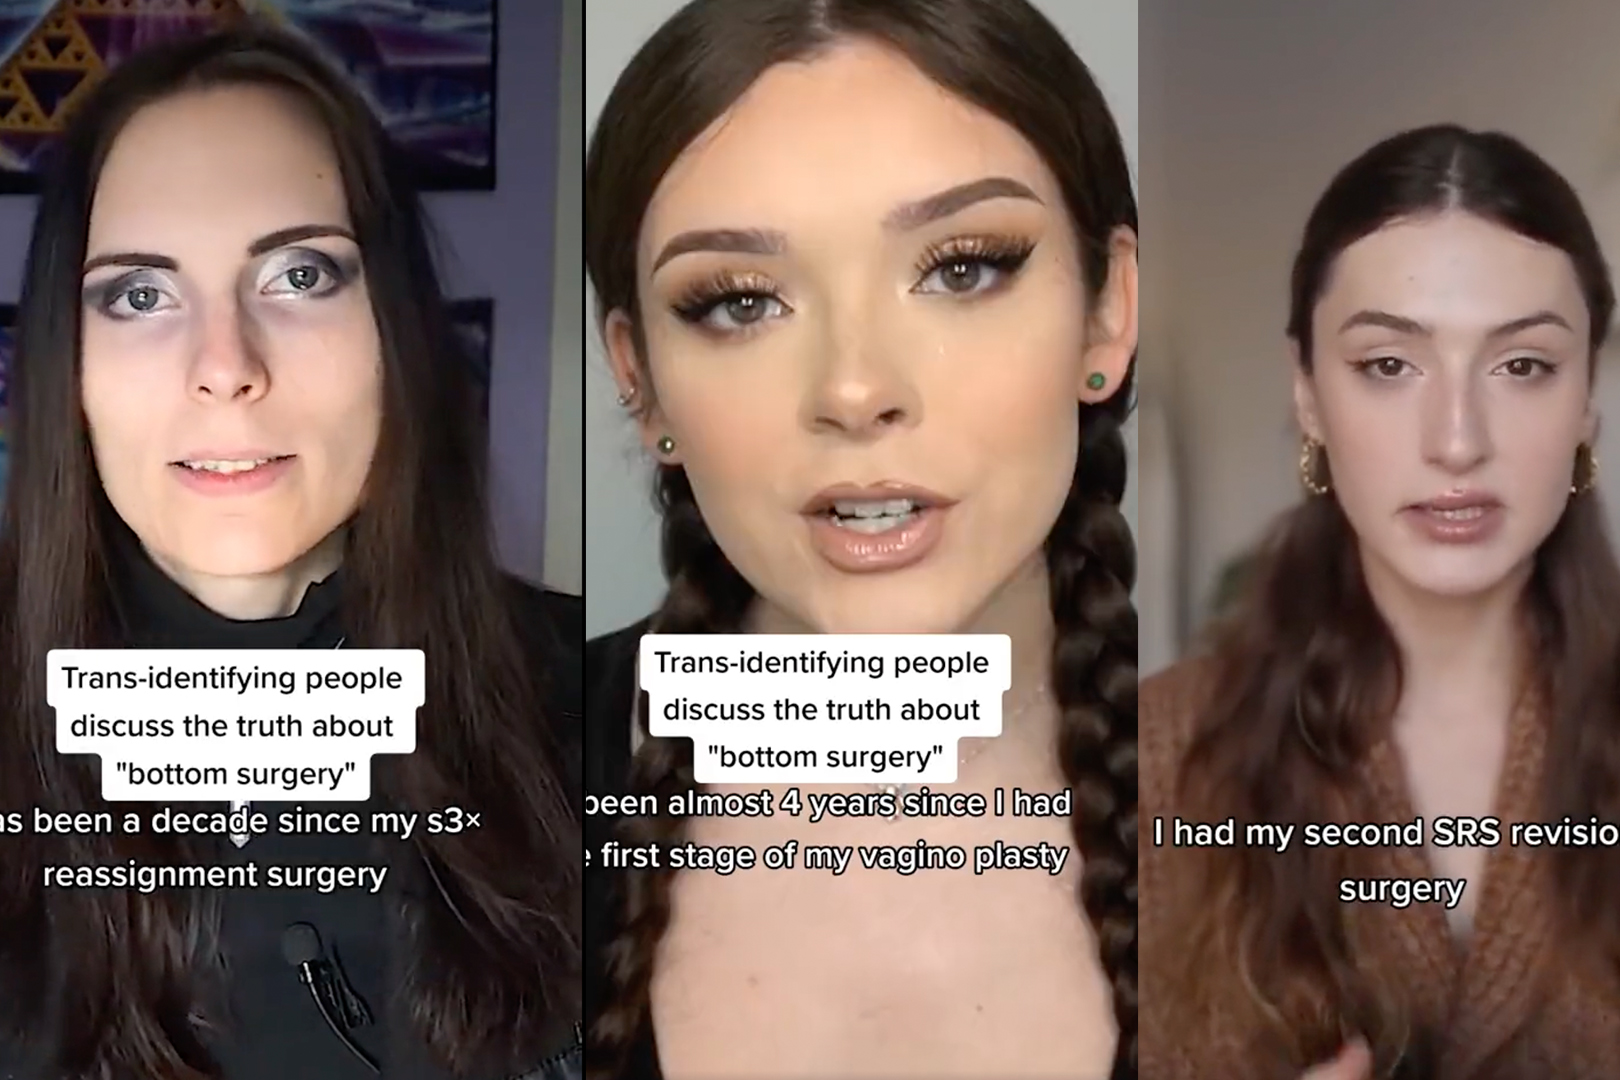 In a viral TikTok video, four biological males reveal their devastating experiences with sex reassignment surgery and the emotional and physical challenges they have faced as a result.